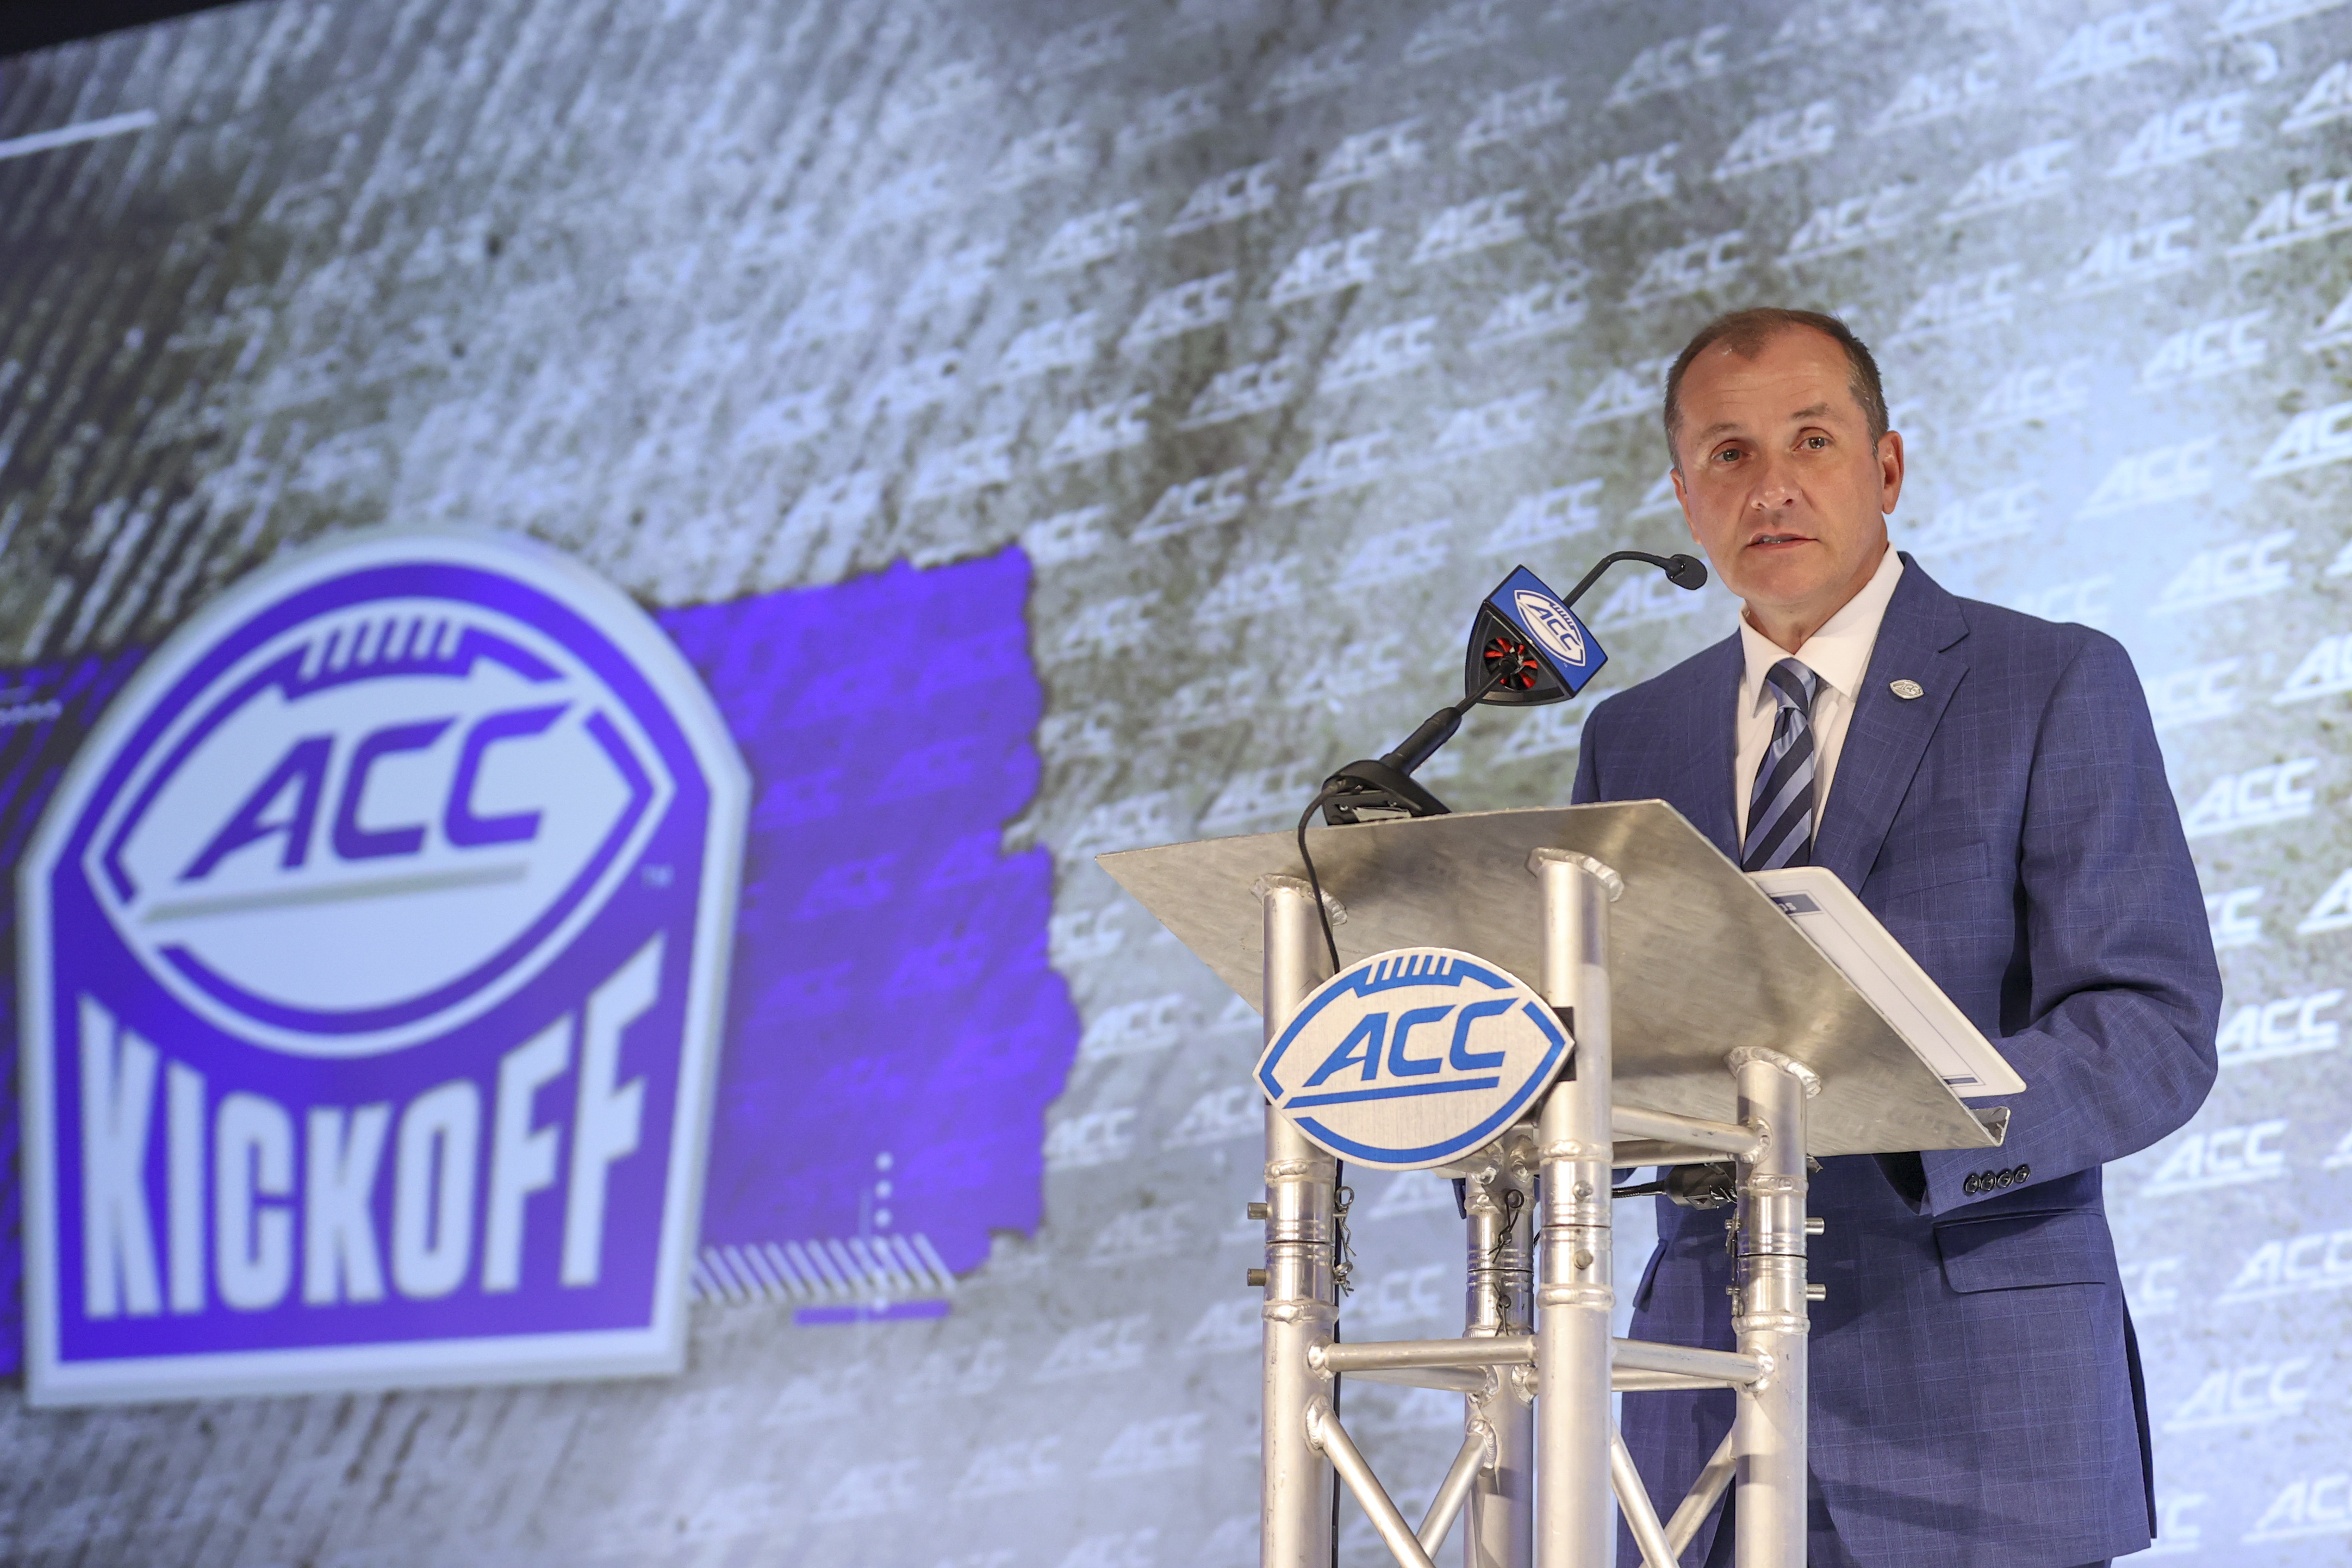 ACC Isn't in Favor of Expanding CFP, Commissioner Jim Phillips Says